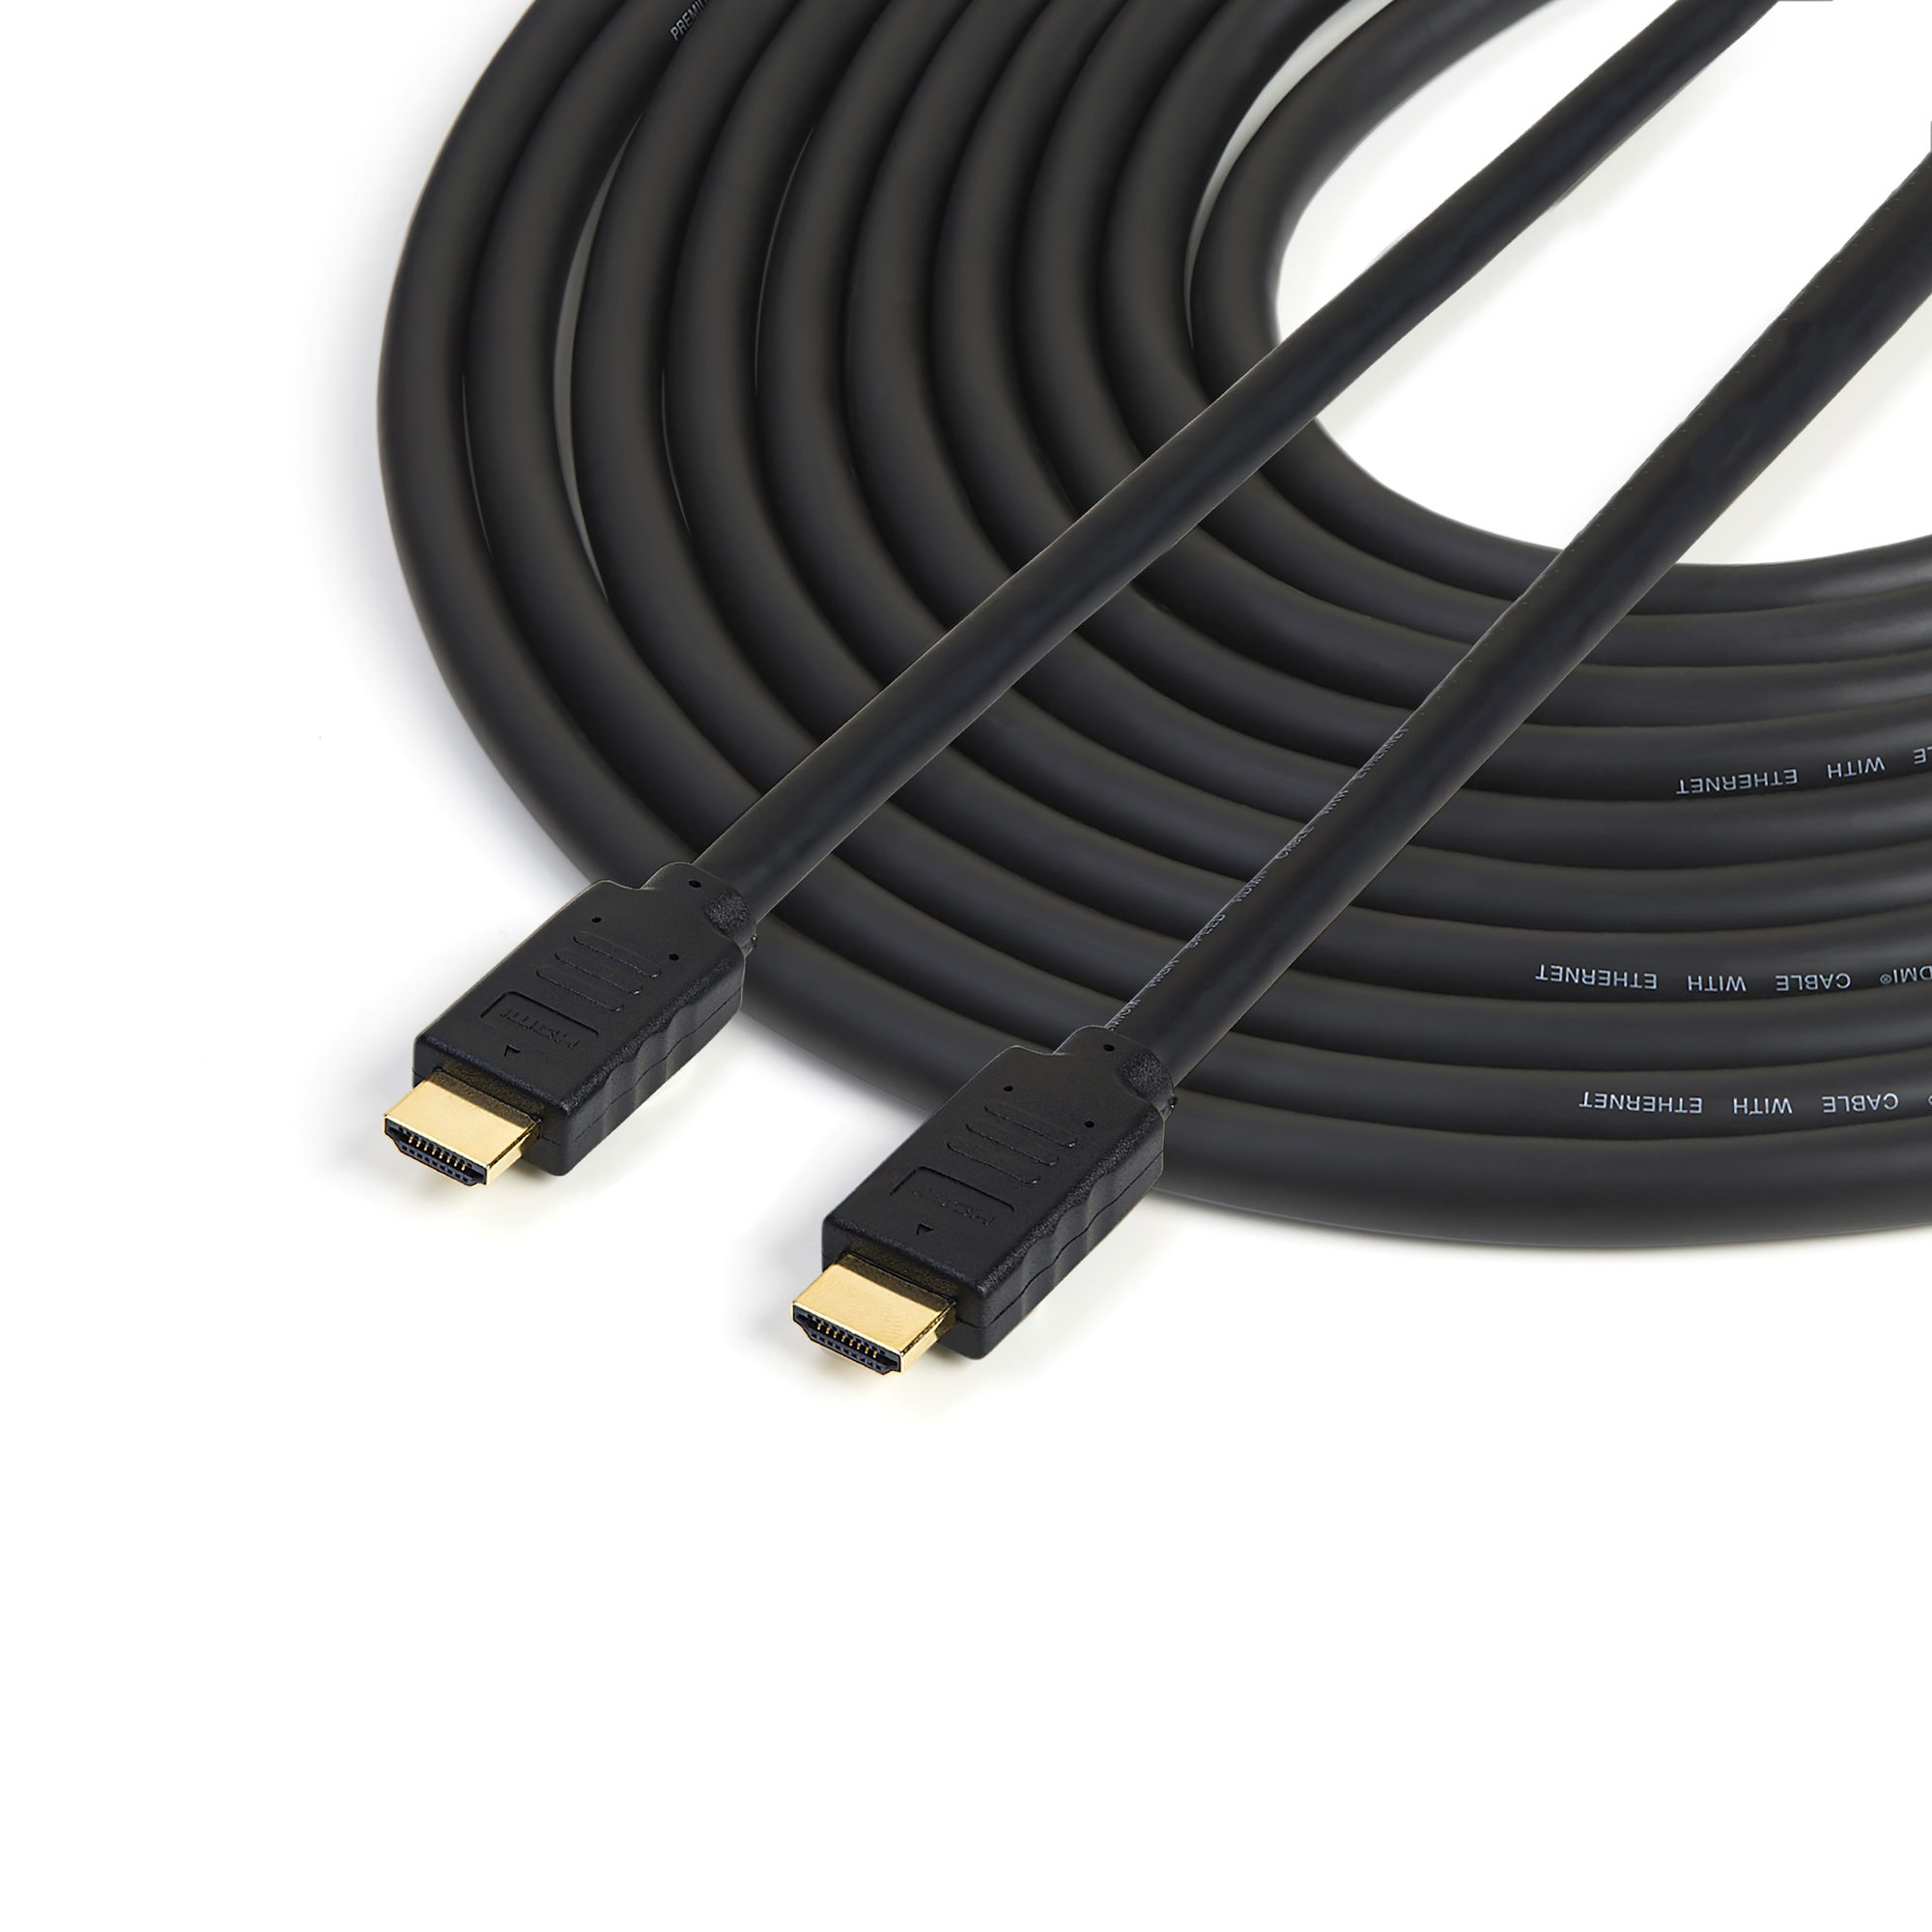 StarTech.com 15m(50ft) HDMI 2.0 Cable, 4K 60Hz Active HDMI Cable, CL2 Rated for In Wall Installation, Long Durable High Speed Ultra-HD HDMI Cable, HDR 10, 18Gbps, Male to Male Cord, Black - Al-Mylar EMI Shielding (HD2MM15MA)